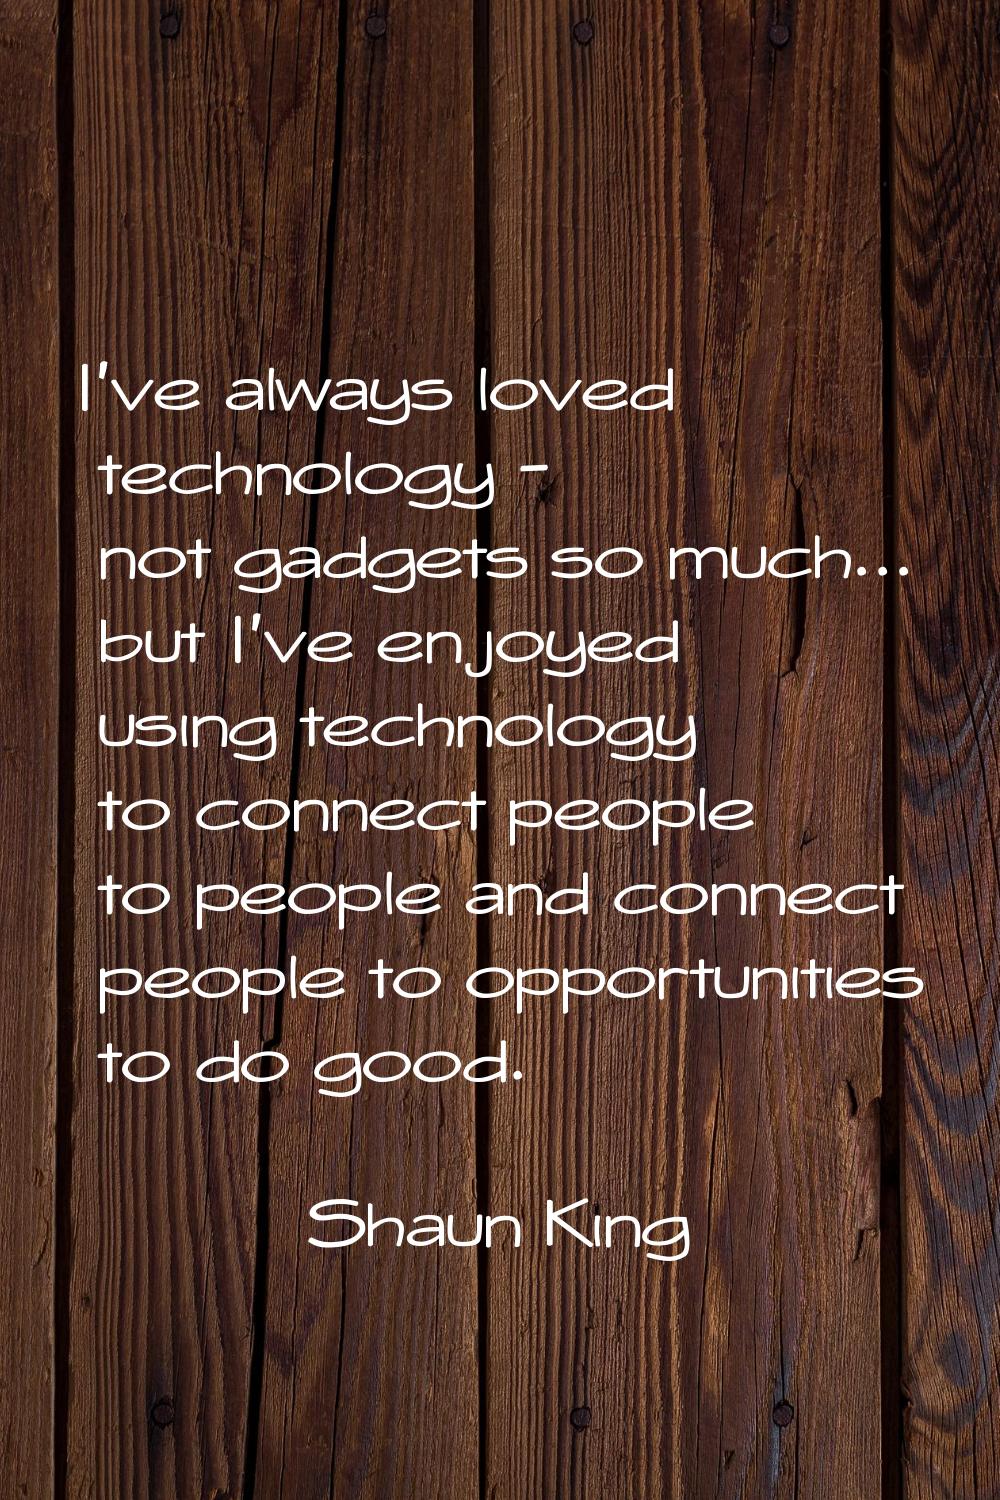 I've always loved technology - not gadgets so much... but I've enjoyed using technology to connect 